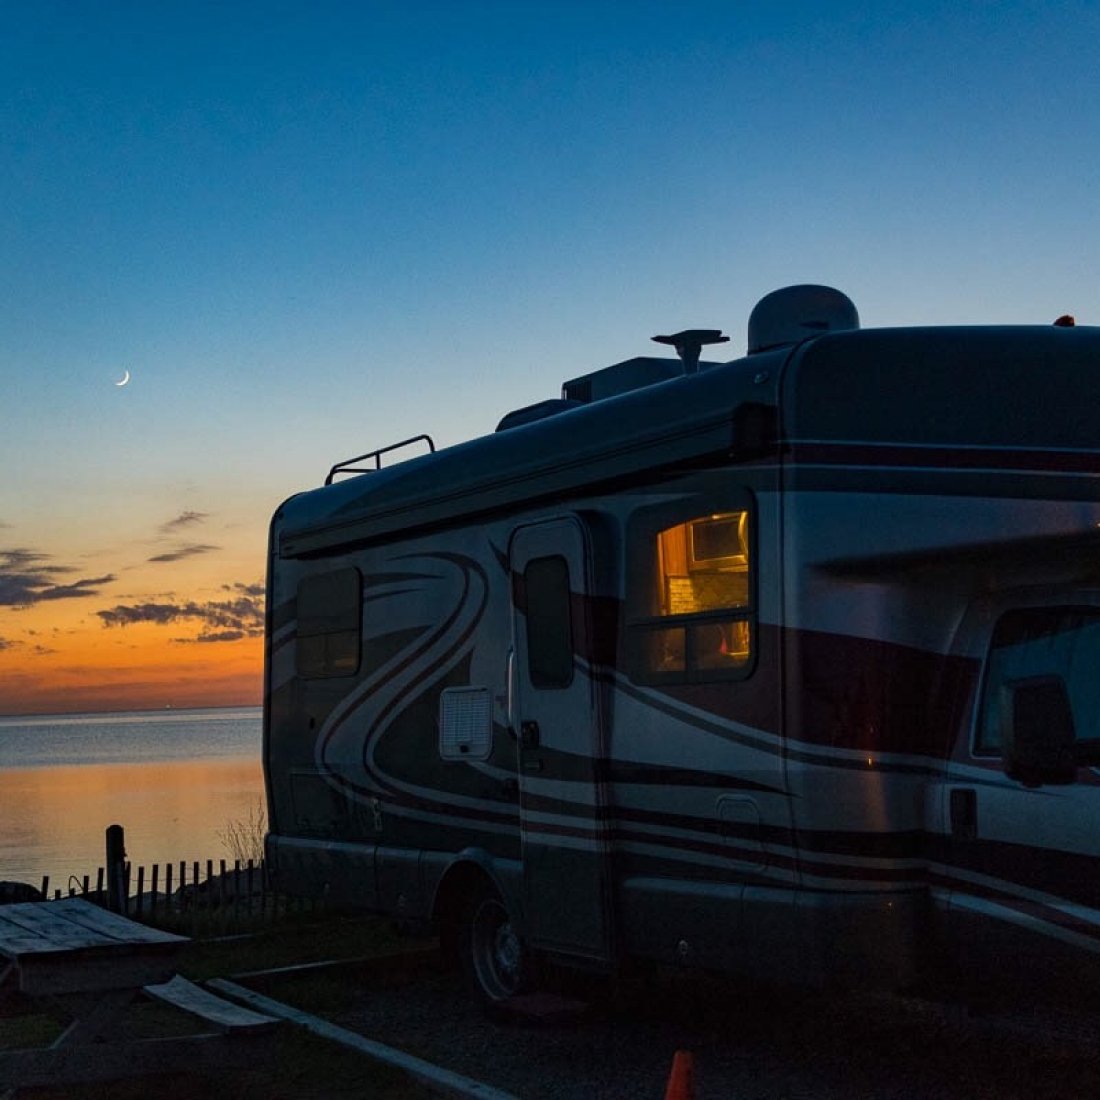 sunset behind motorhome at Outer Banks campgrounds